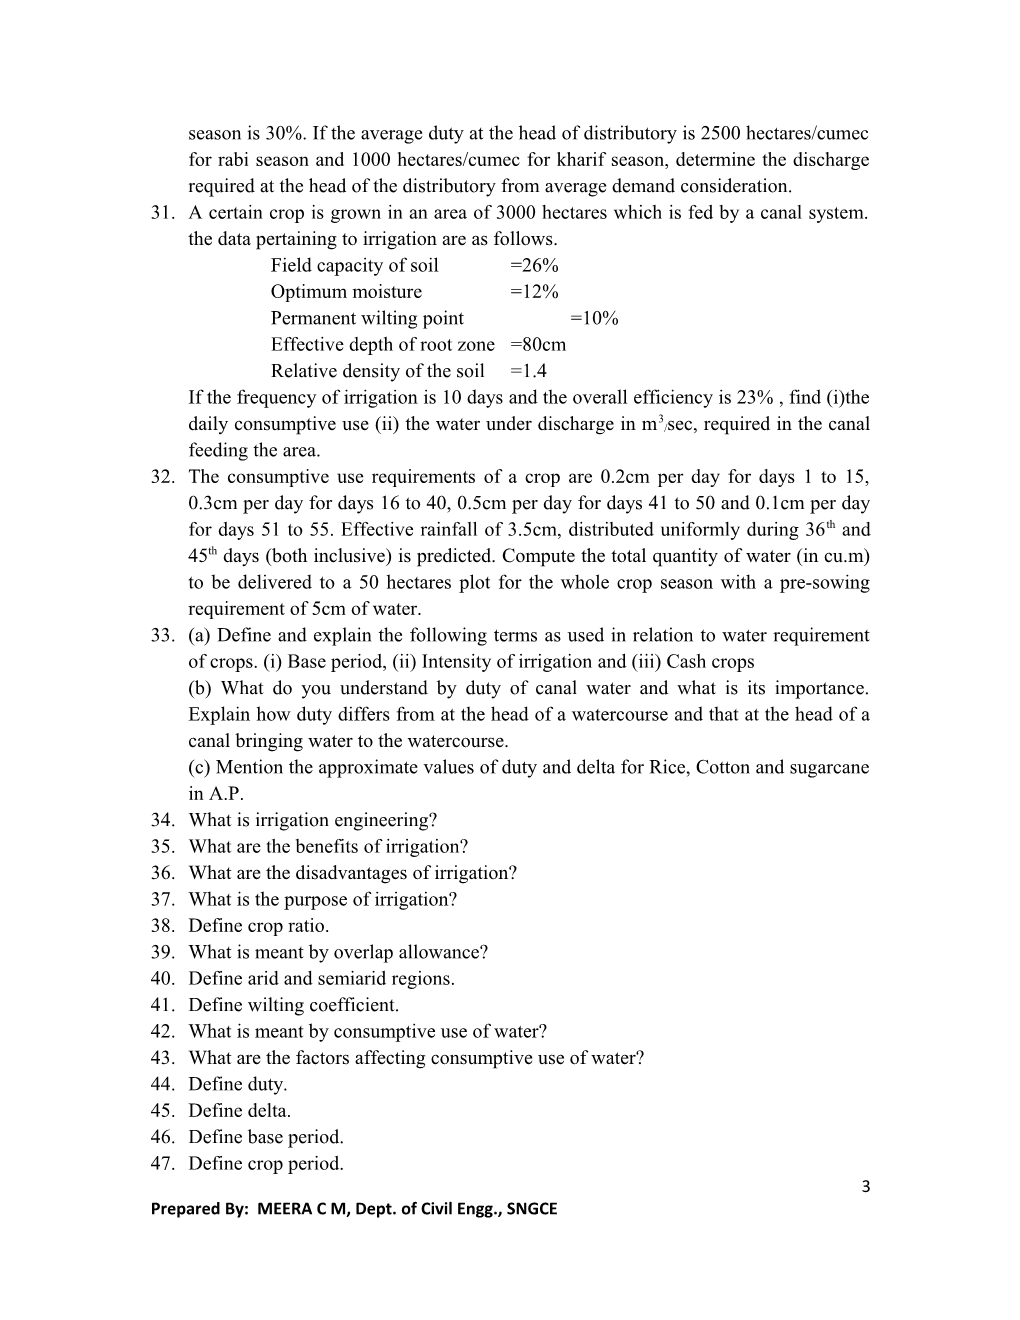 Questions from Previous Year University Question Papers